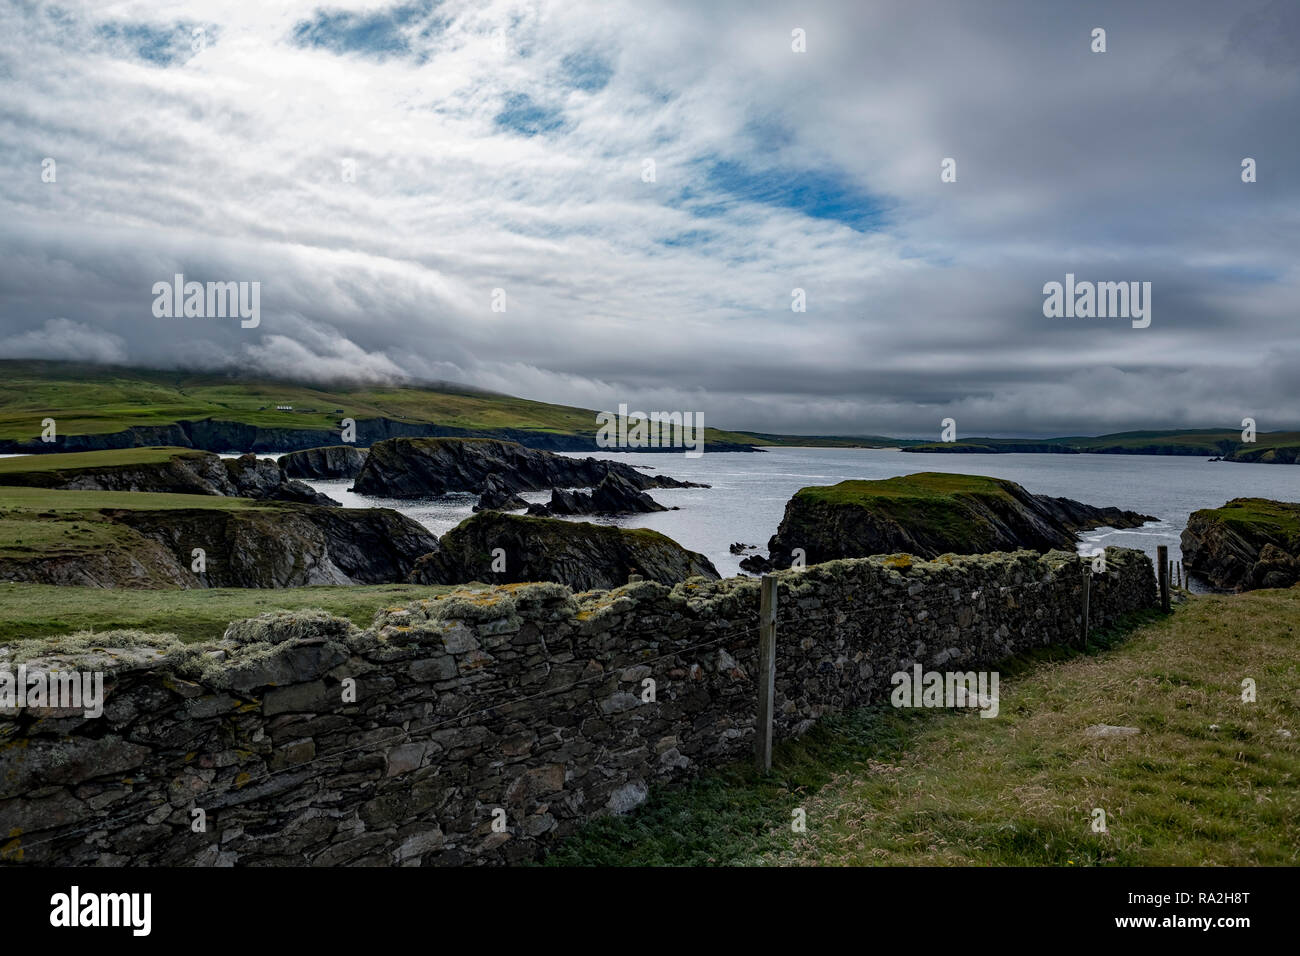 Stone wal separating pasture land on a croft overlooking the Atlantic Ocean on a cloudy day on the Mainland of the Shetland Islands of Scotland Stock Photo